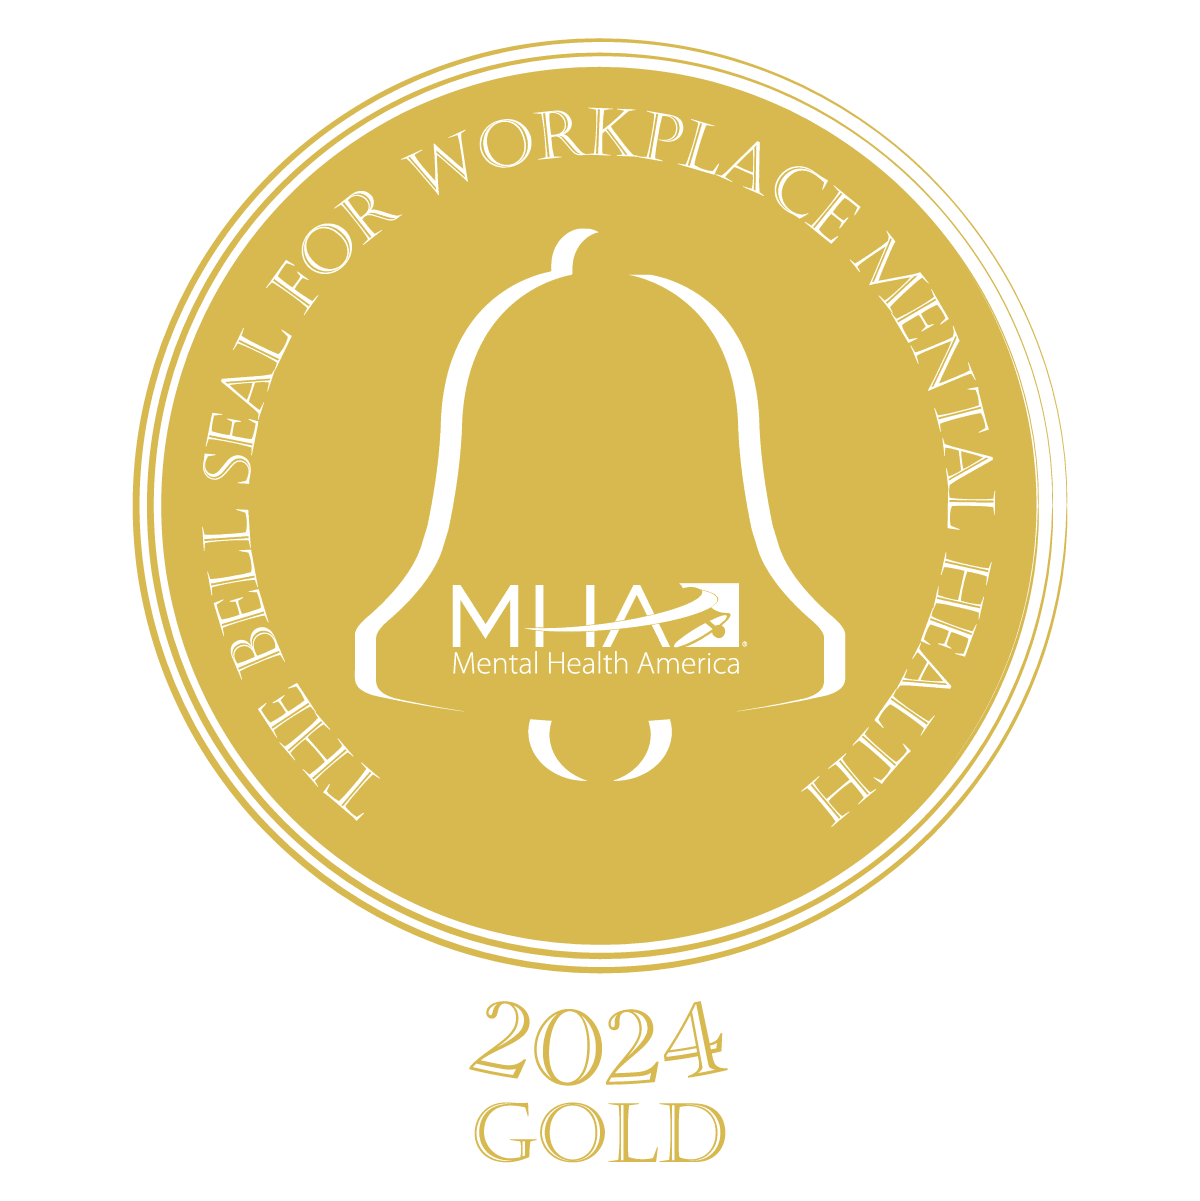 The Bell Seal for Workplace Mental Health 2024 Gold logo